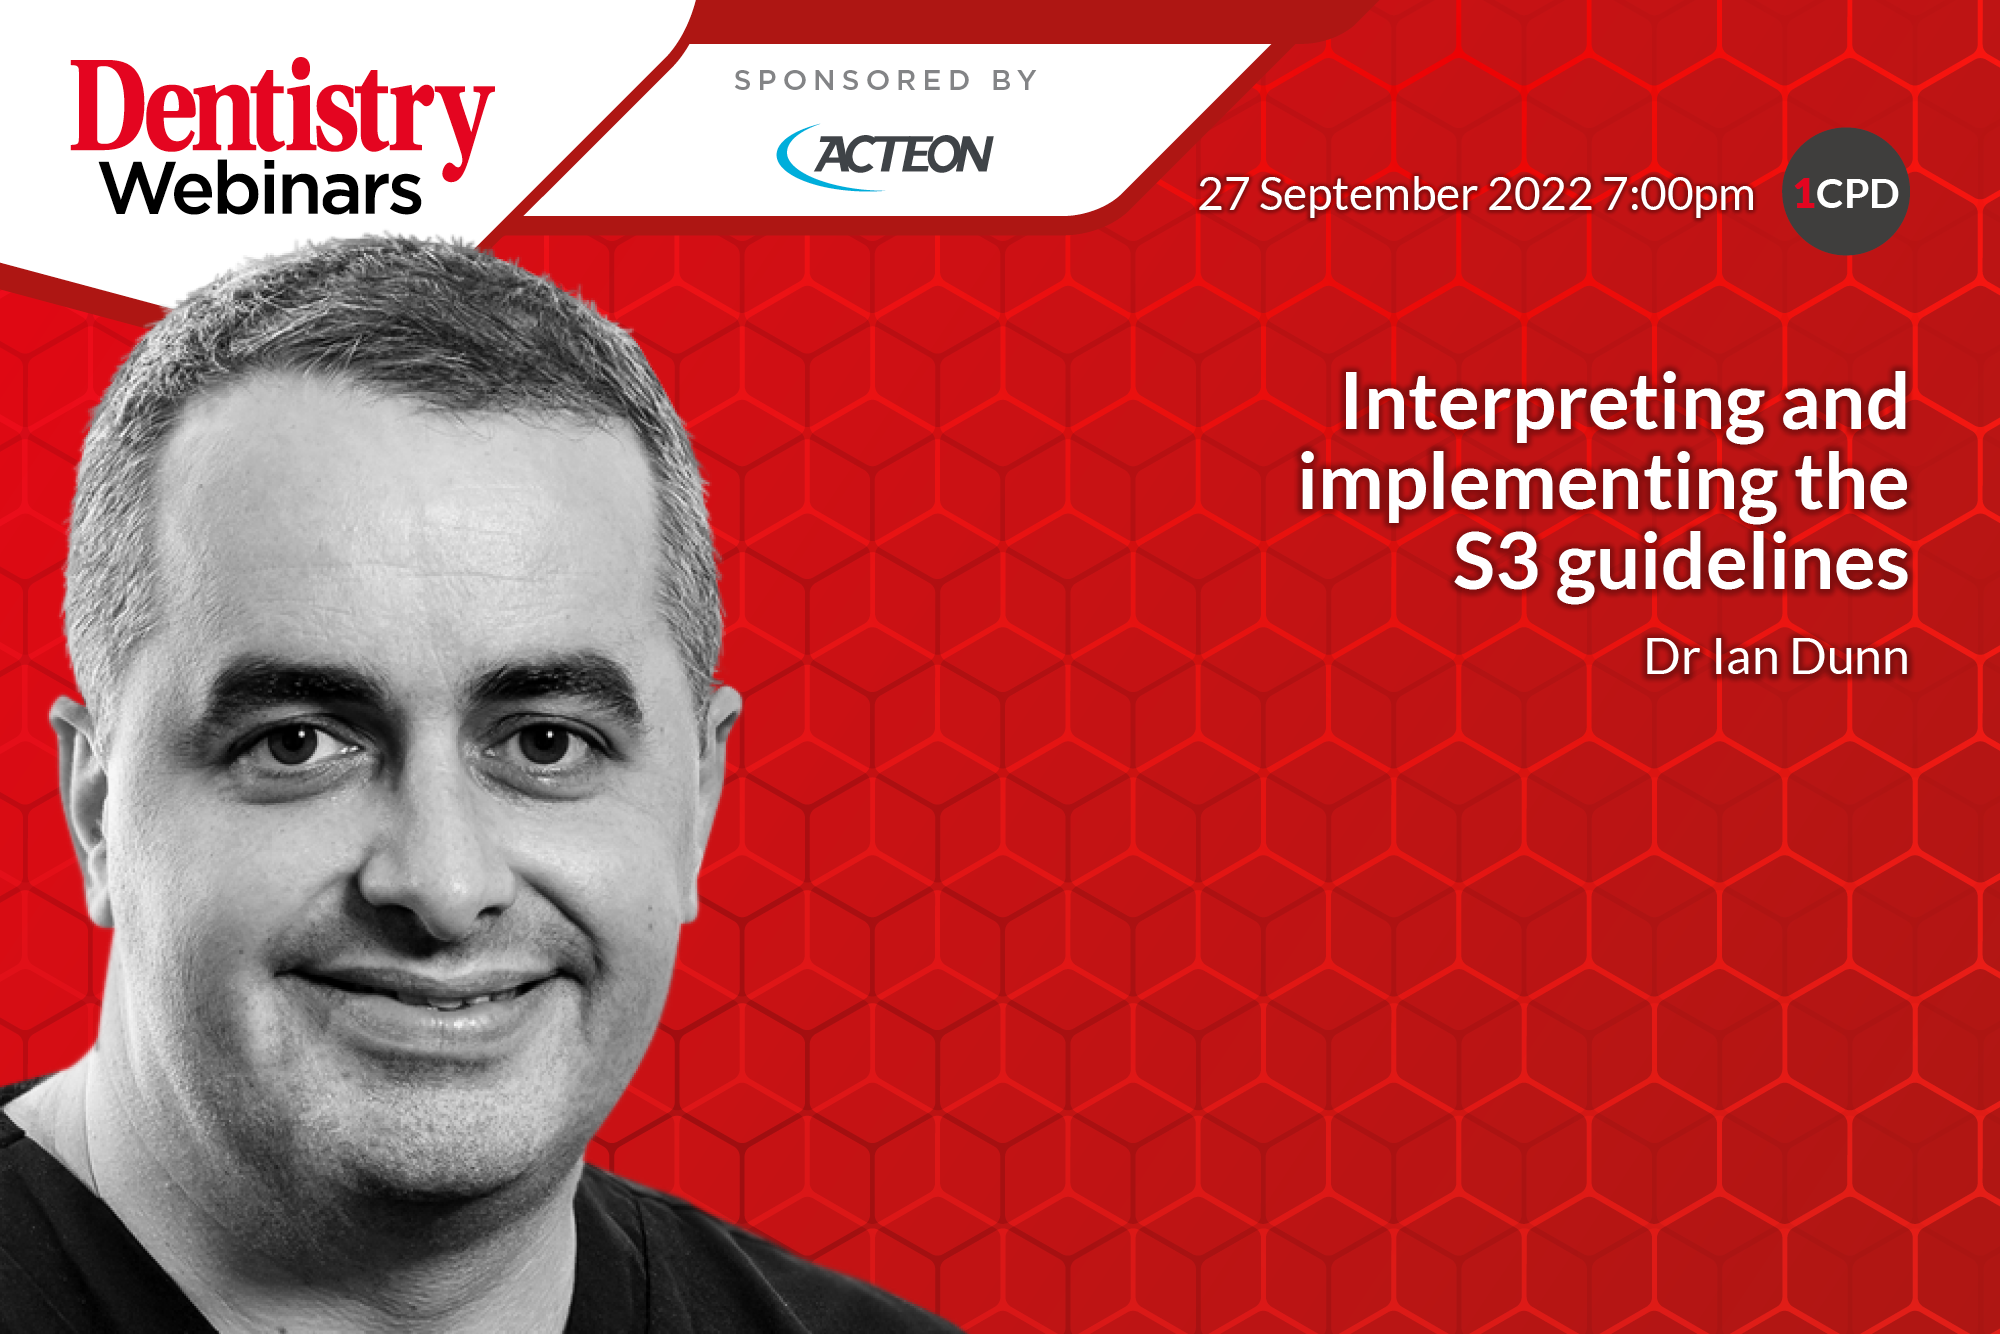 Join Dr Ian Dunn on Tuesday 27 September 2022 at 7pm for his webinar on interpreting and implementing the S3 guidelines.